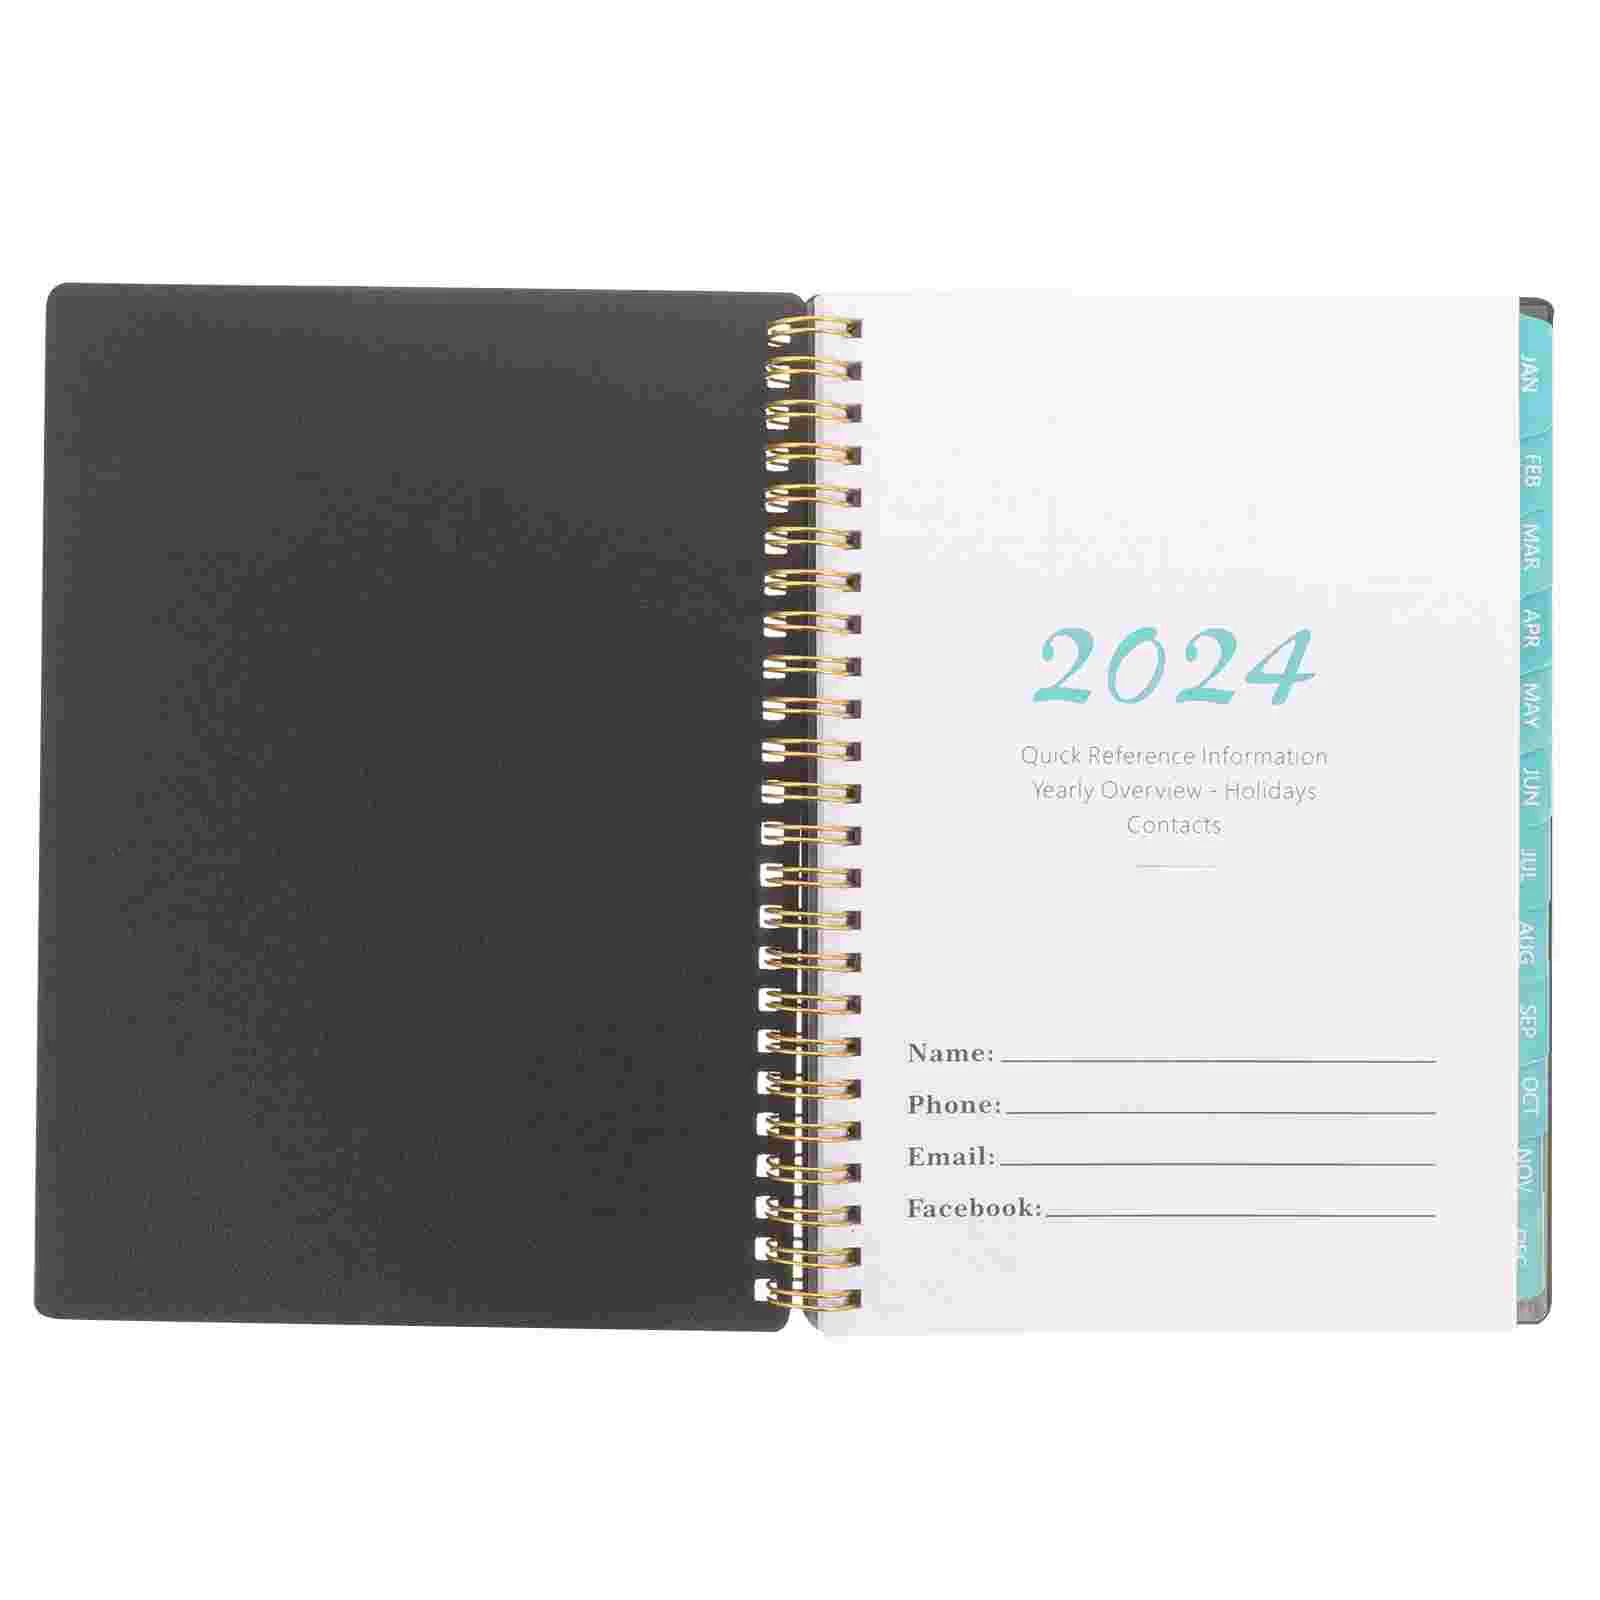 Coil Note Book Portable Planner Organizer Office Academic Planner Office Accessory portable leather a6 binder budget planner notebook pockets zipper bags caculator 6 hole binder covers folder for school office